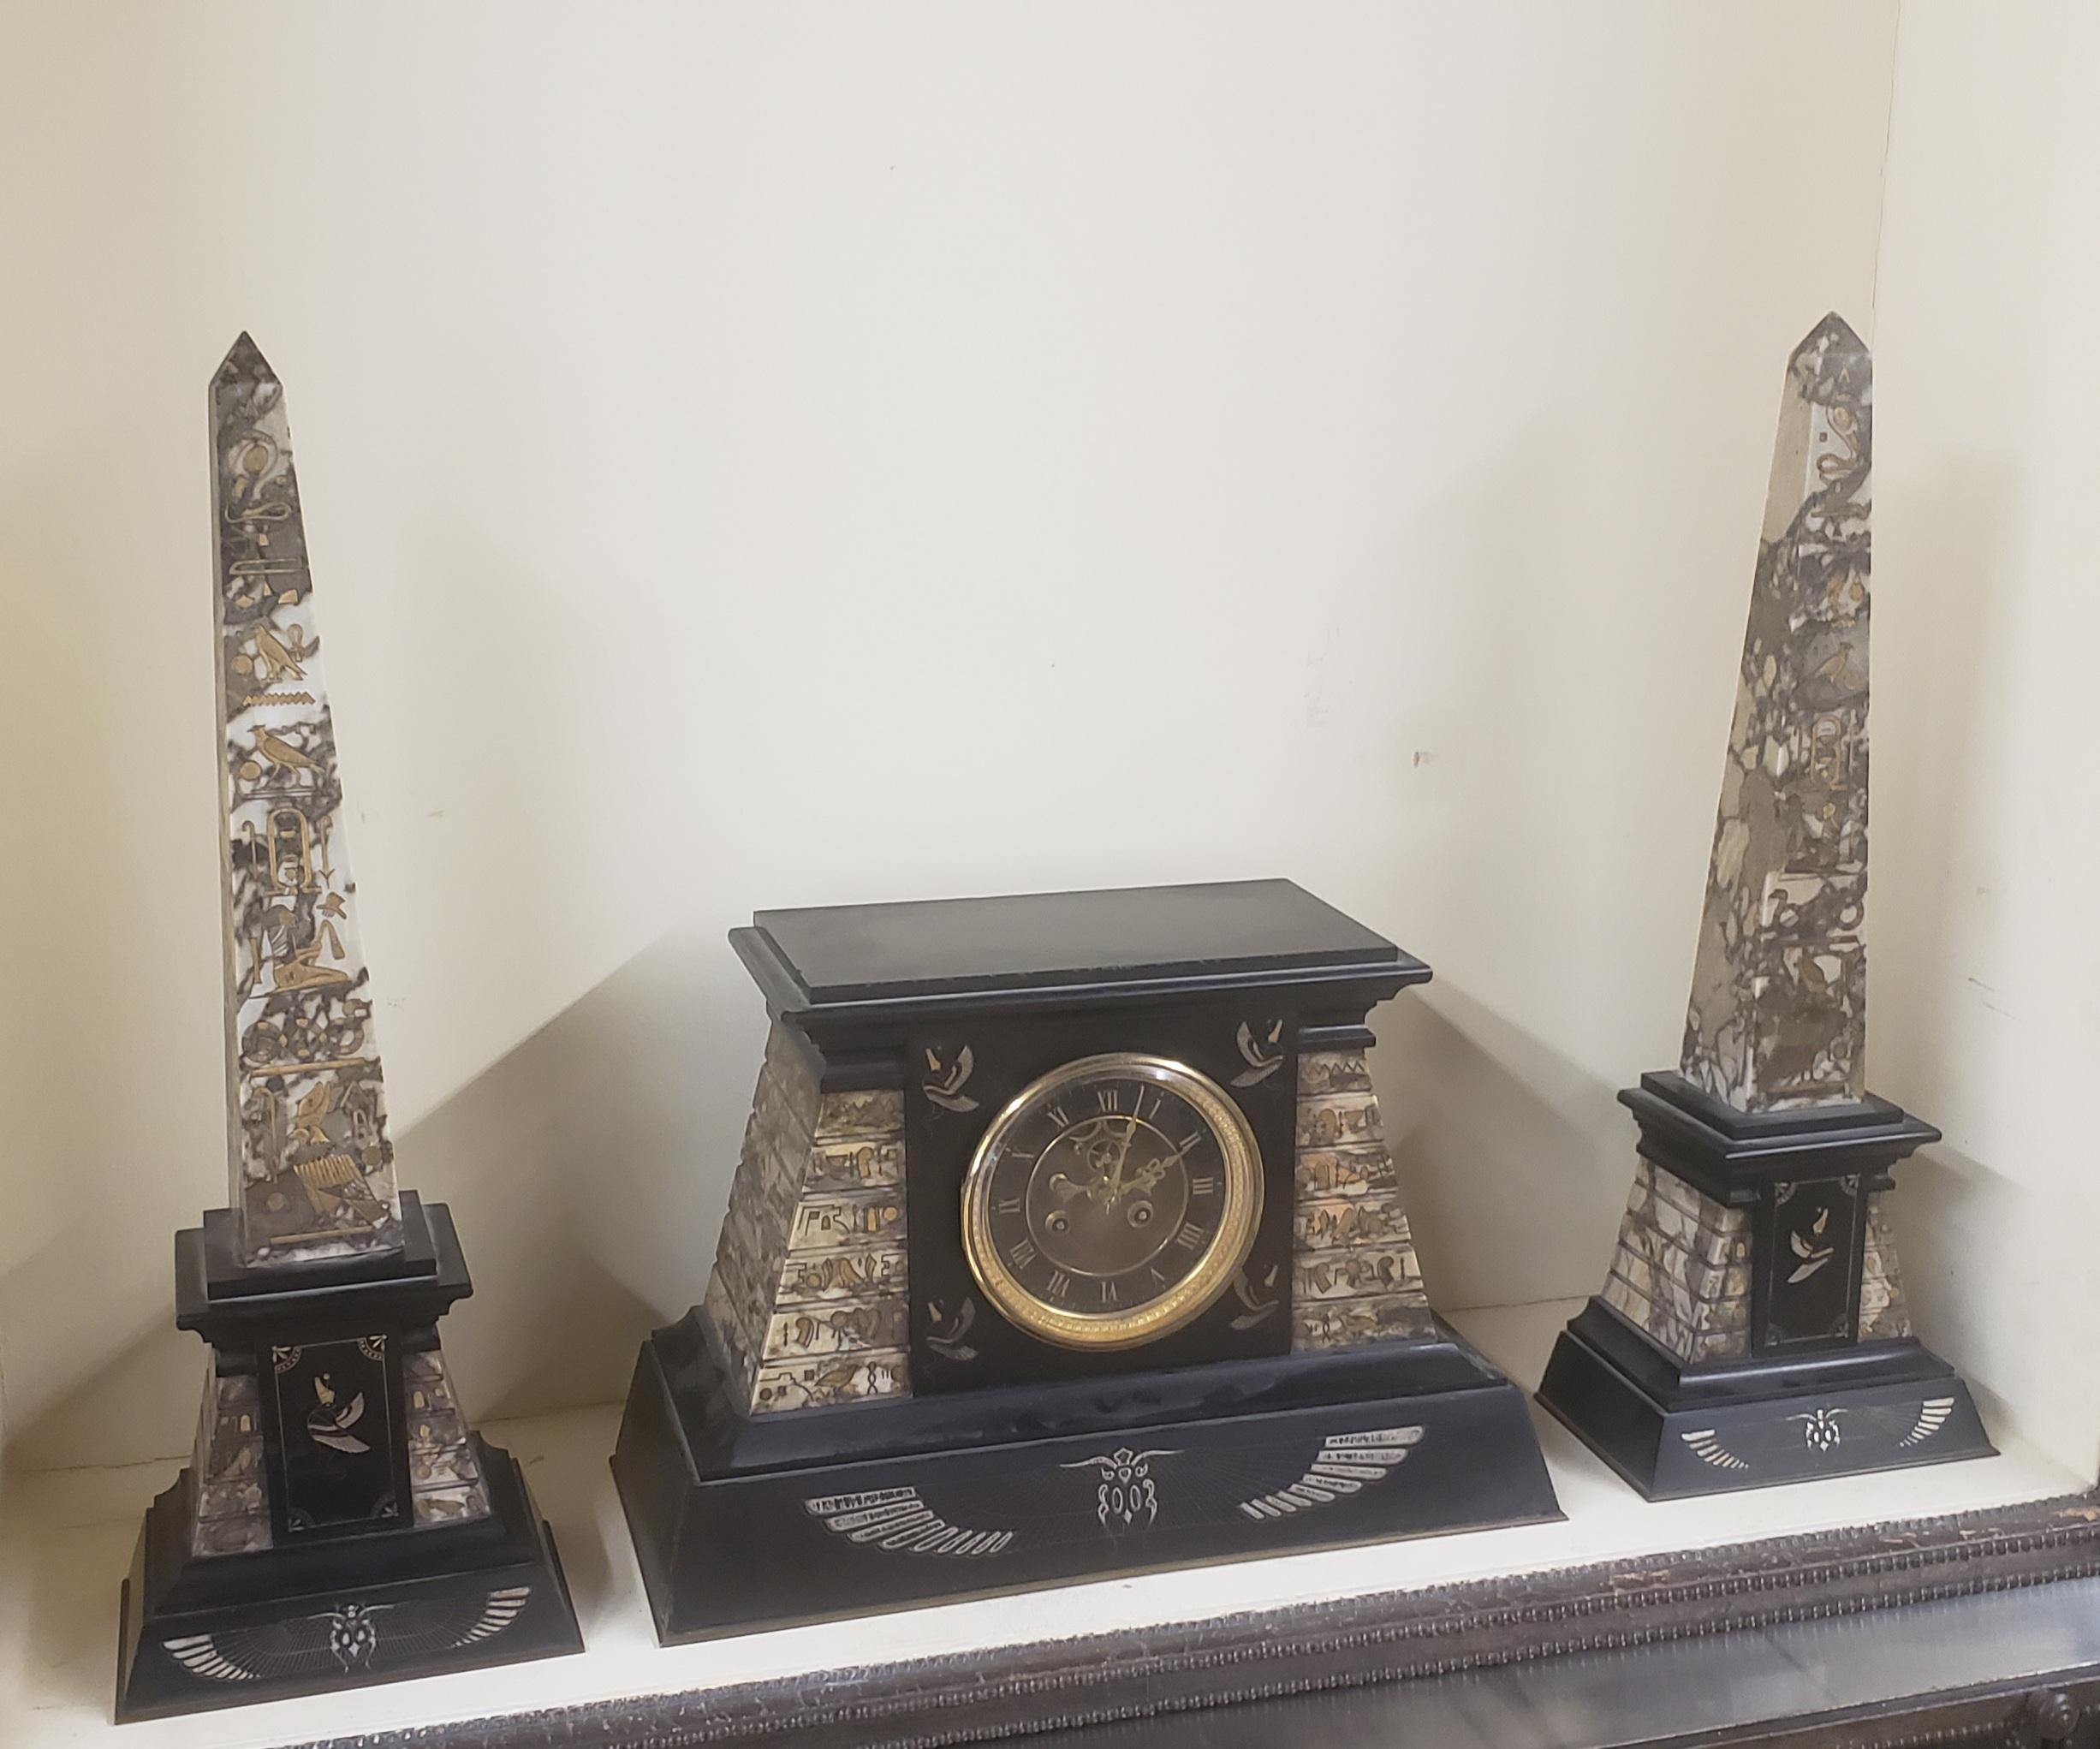 An original, very rare Egyptian revival Mantle Clock and Obelisks garniture set by the very famous Black Starr & Frost, the oldest jewelry company in America founded in 1810. Garniture set dates from the 1860s and maker's name engraved underneath.